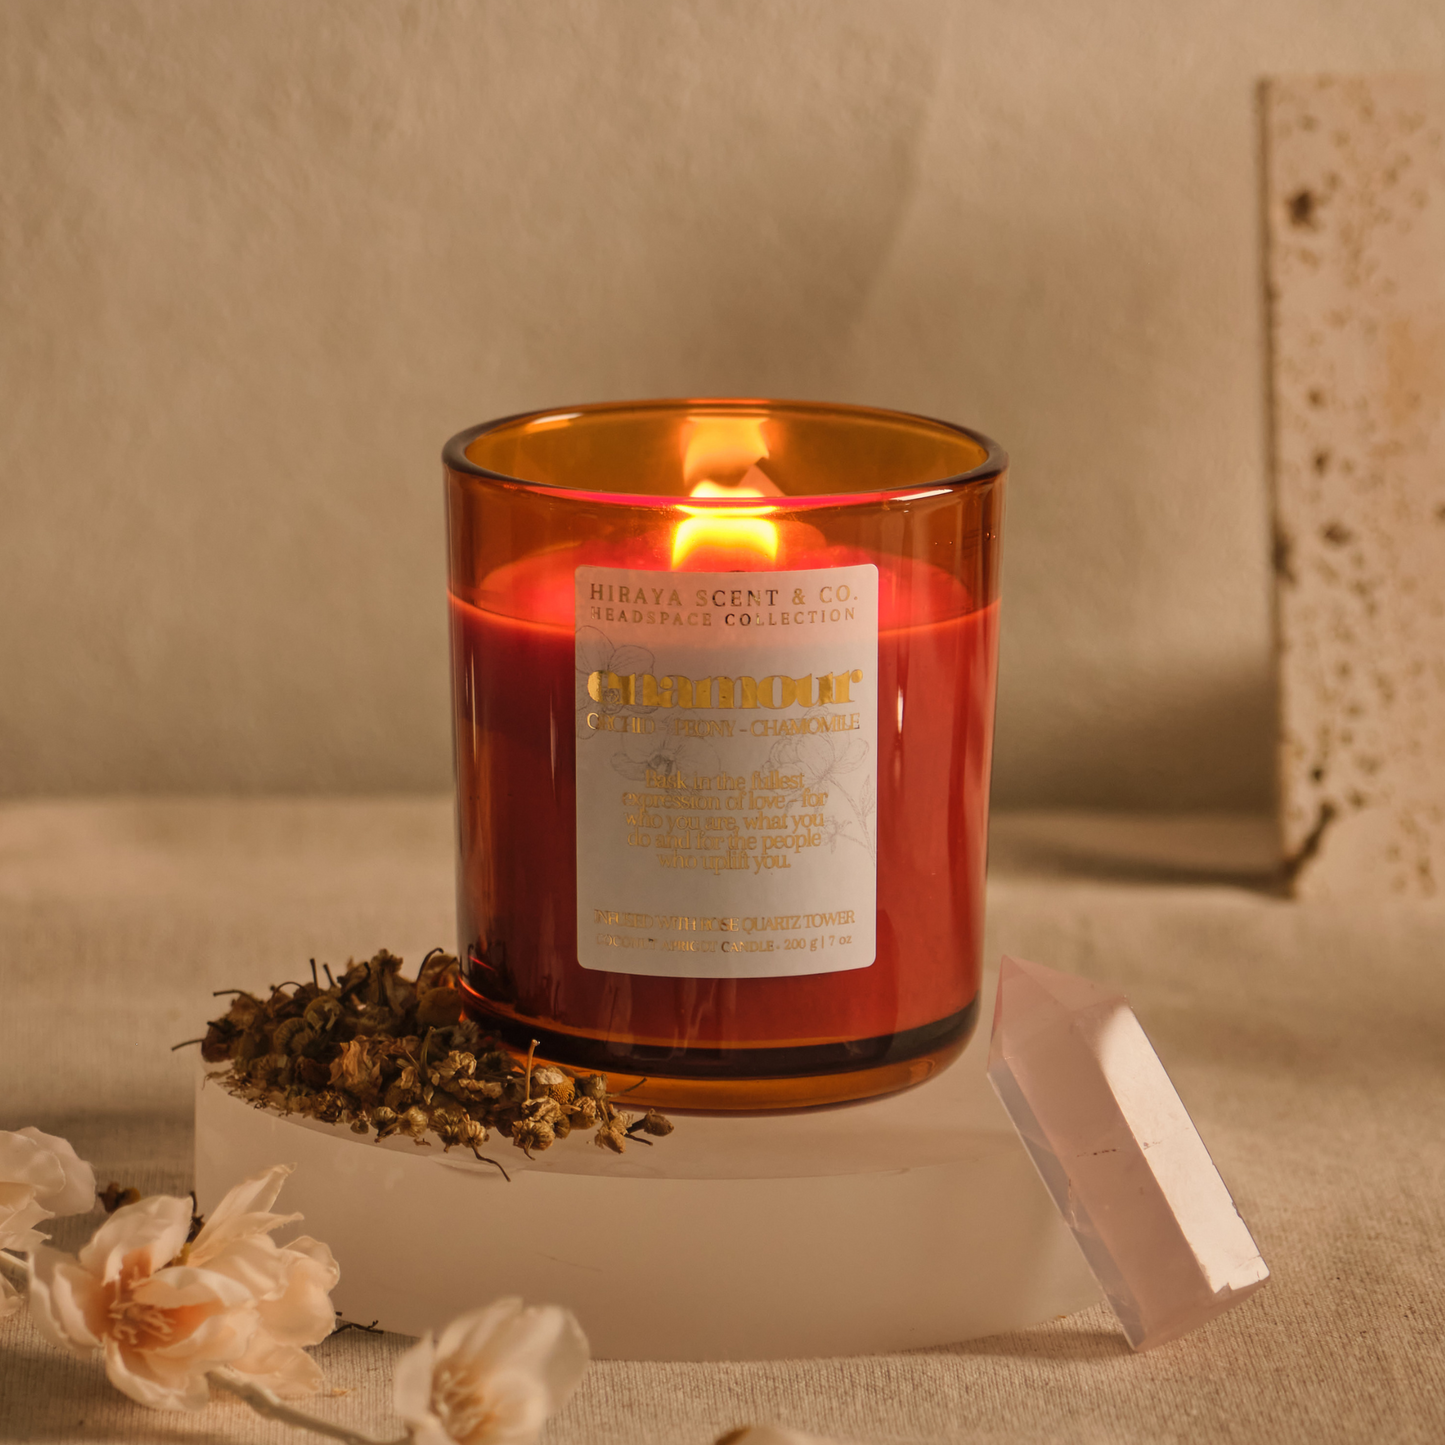 ENAMOUR Candle